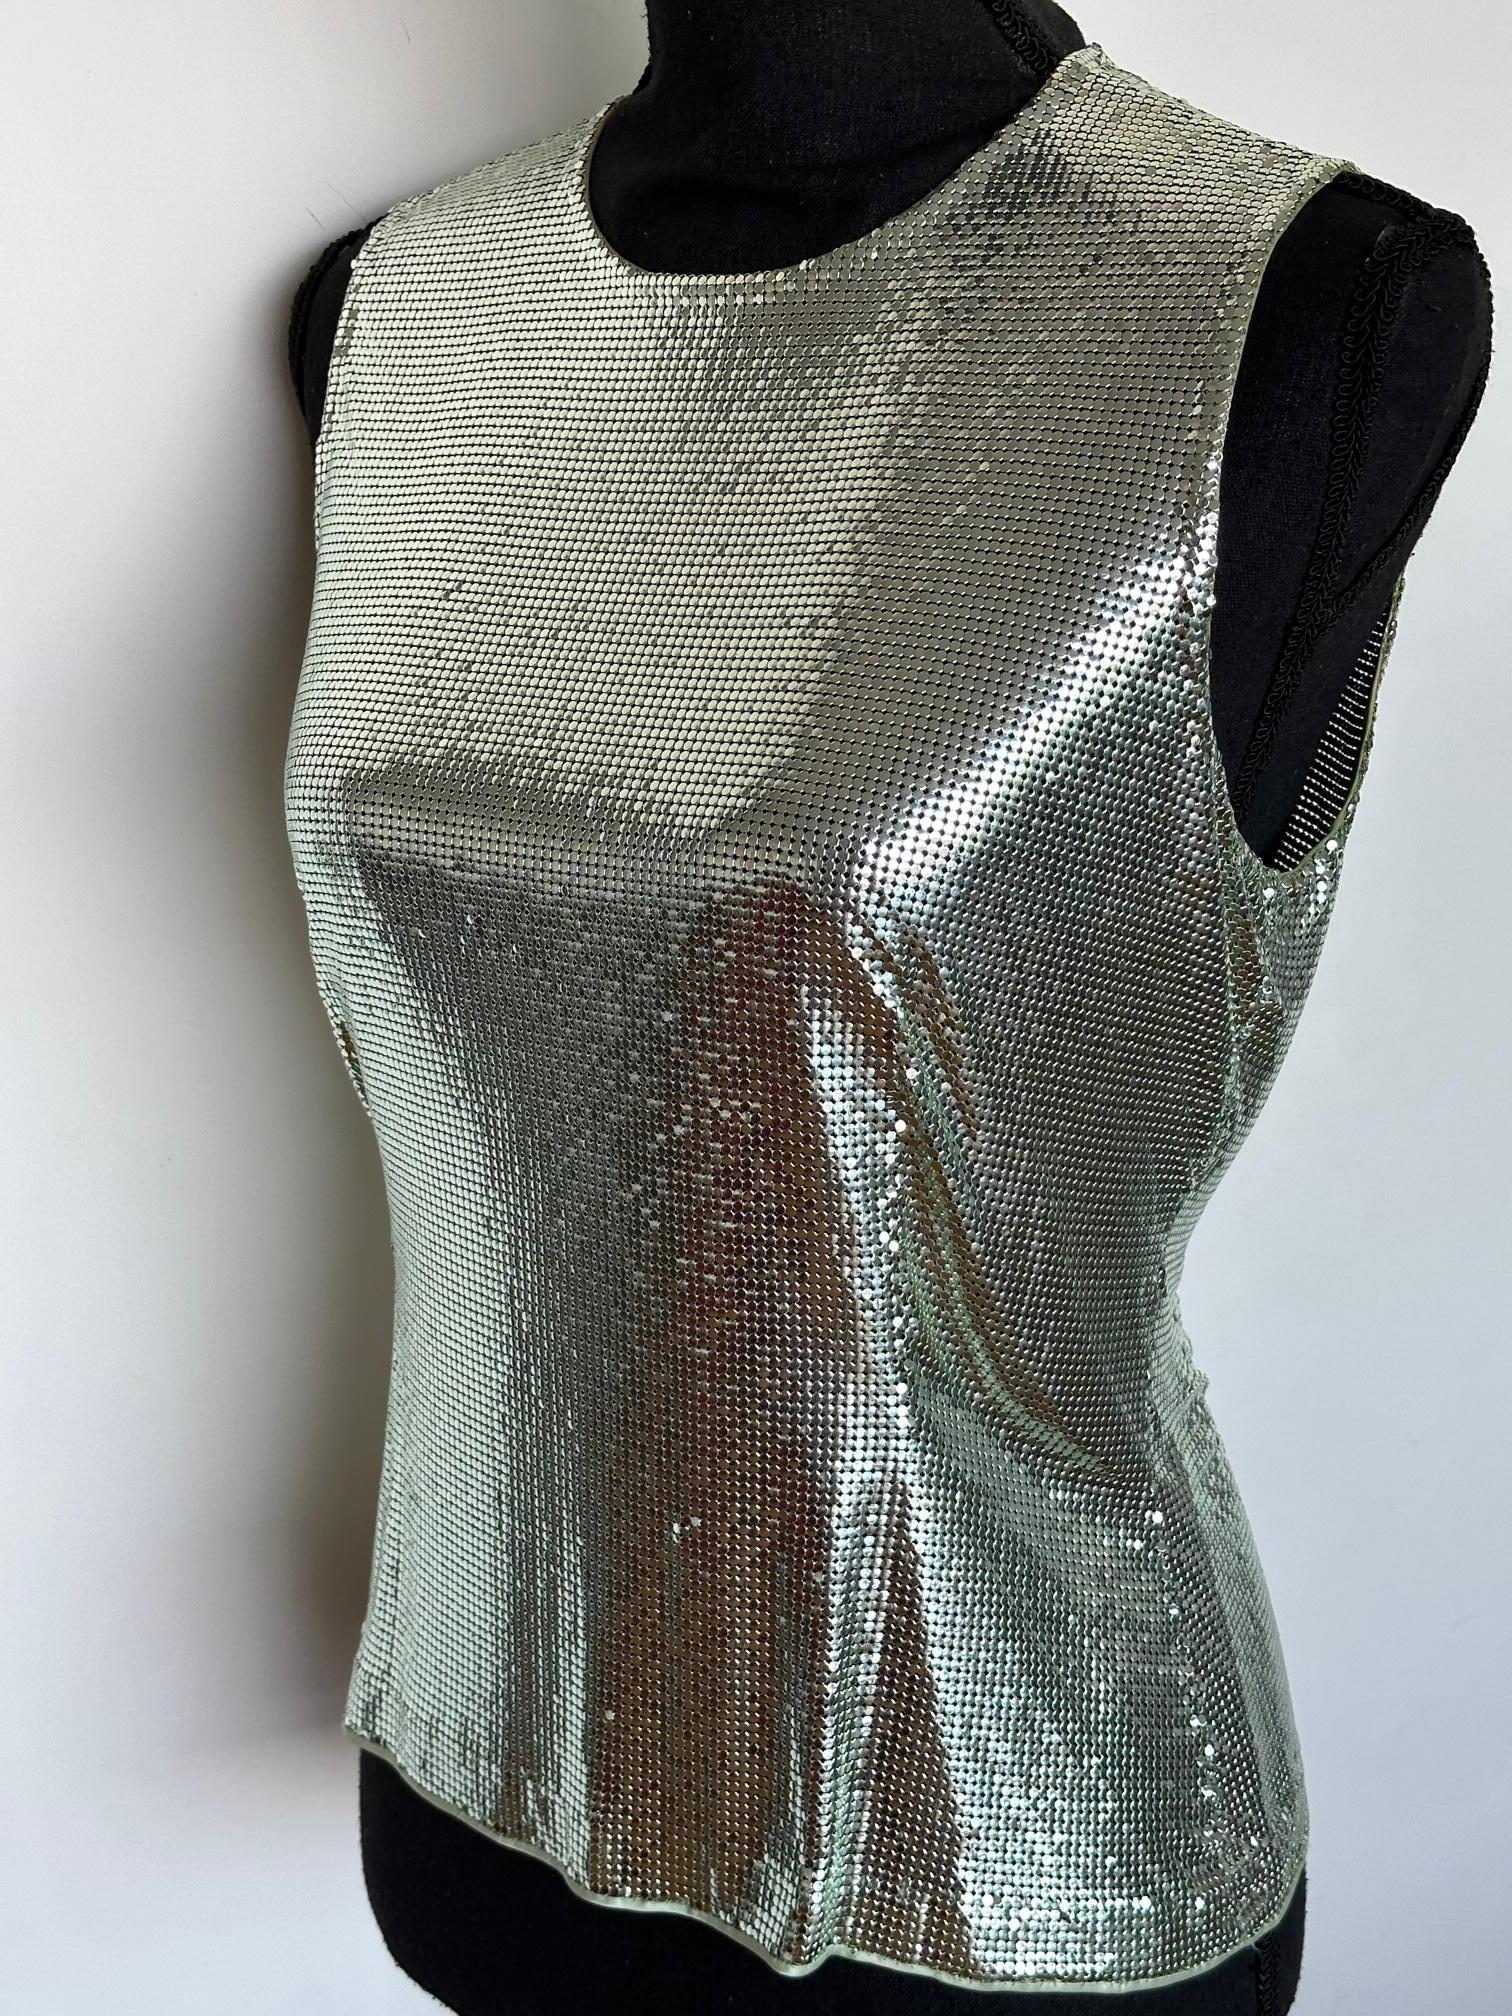 Gianni Versace  strapless tank top 
back zipper closure.
Winter 1994 Fall Collection
Condition: Great
▪ Size IT 38
Brand:Gianni Versace
color: teal
Material :oroton

